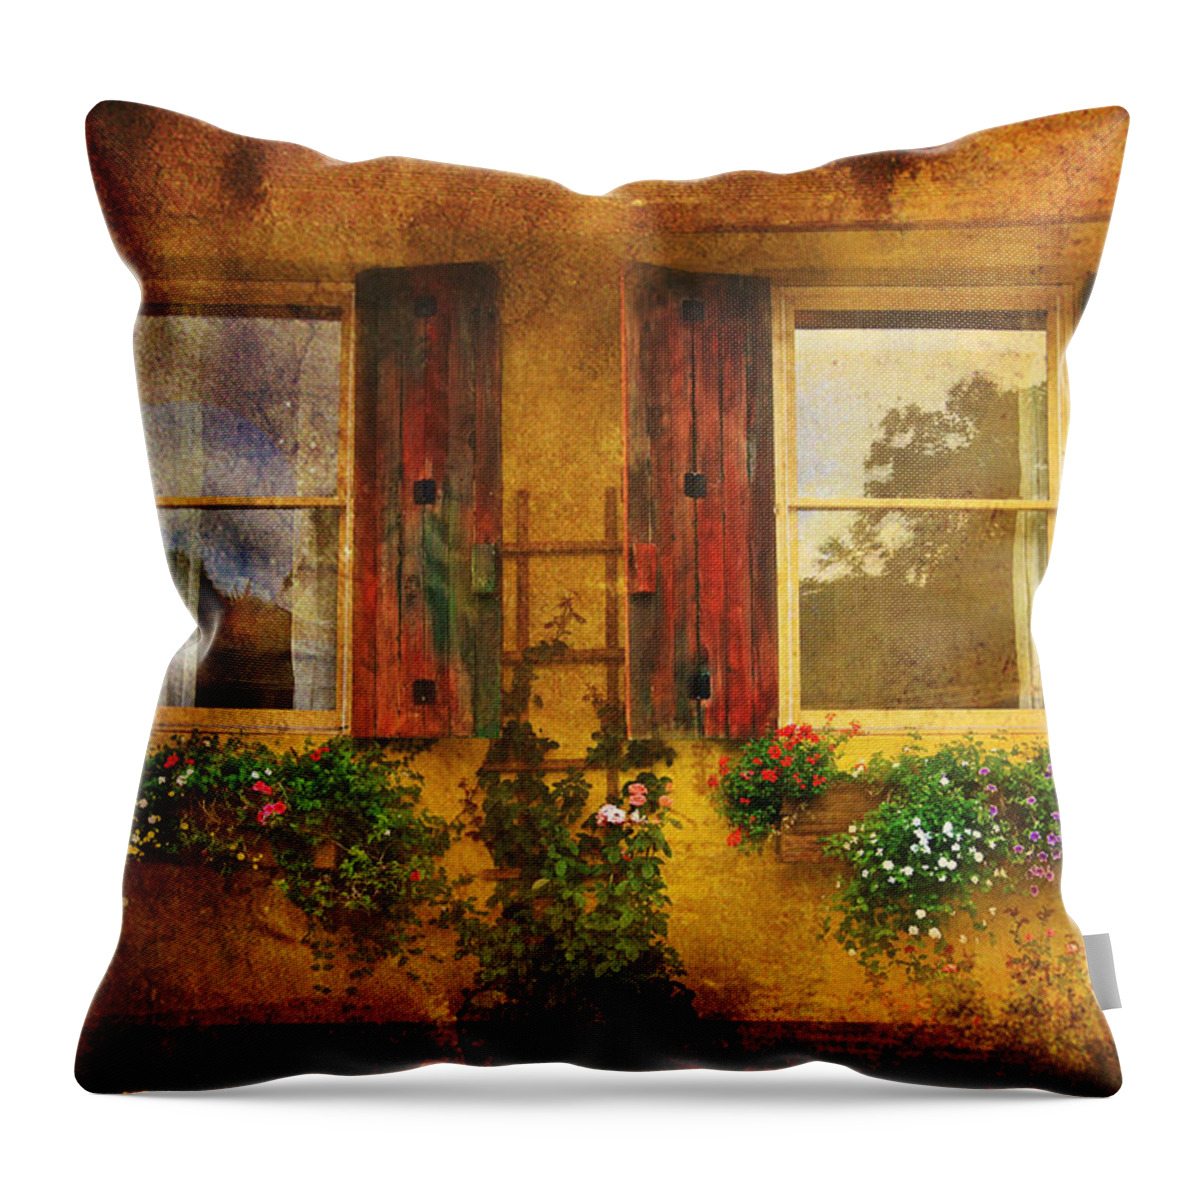 Architecture Arts Throw Pillow featuring the photograph Reflection by Kandy Hurley